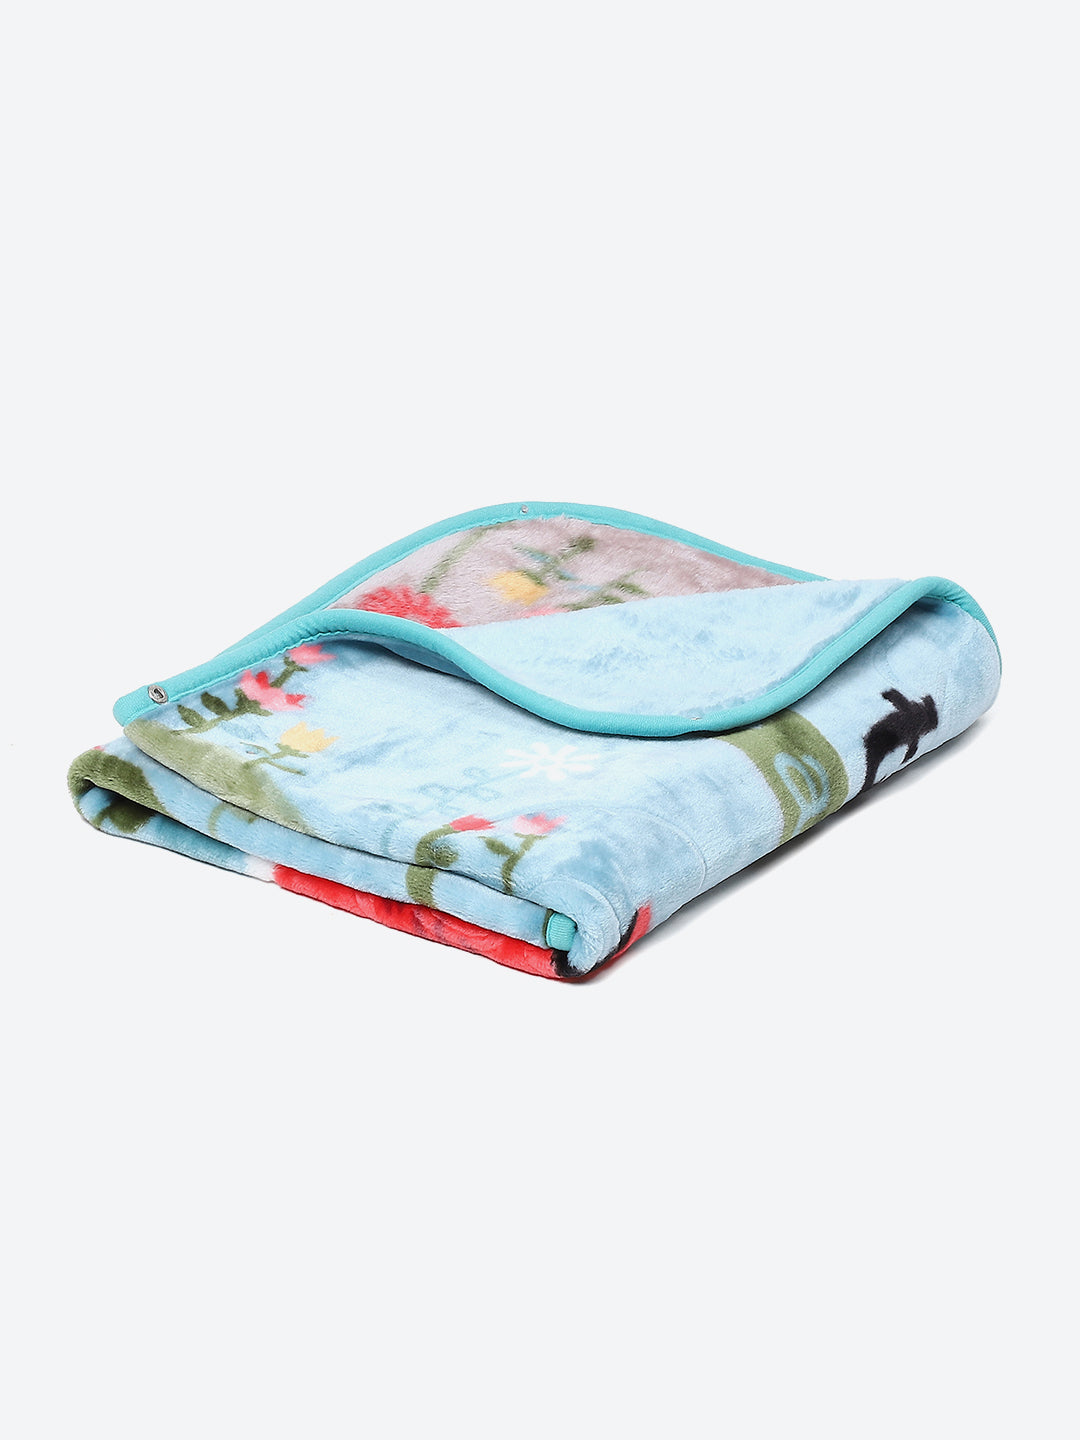 Printed Baby Blanket for Heavy Winter -1 Ply